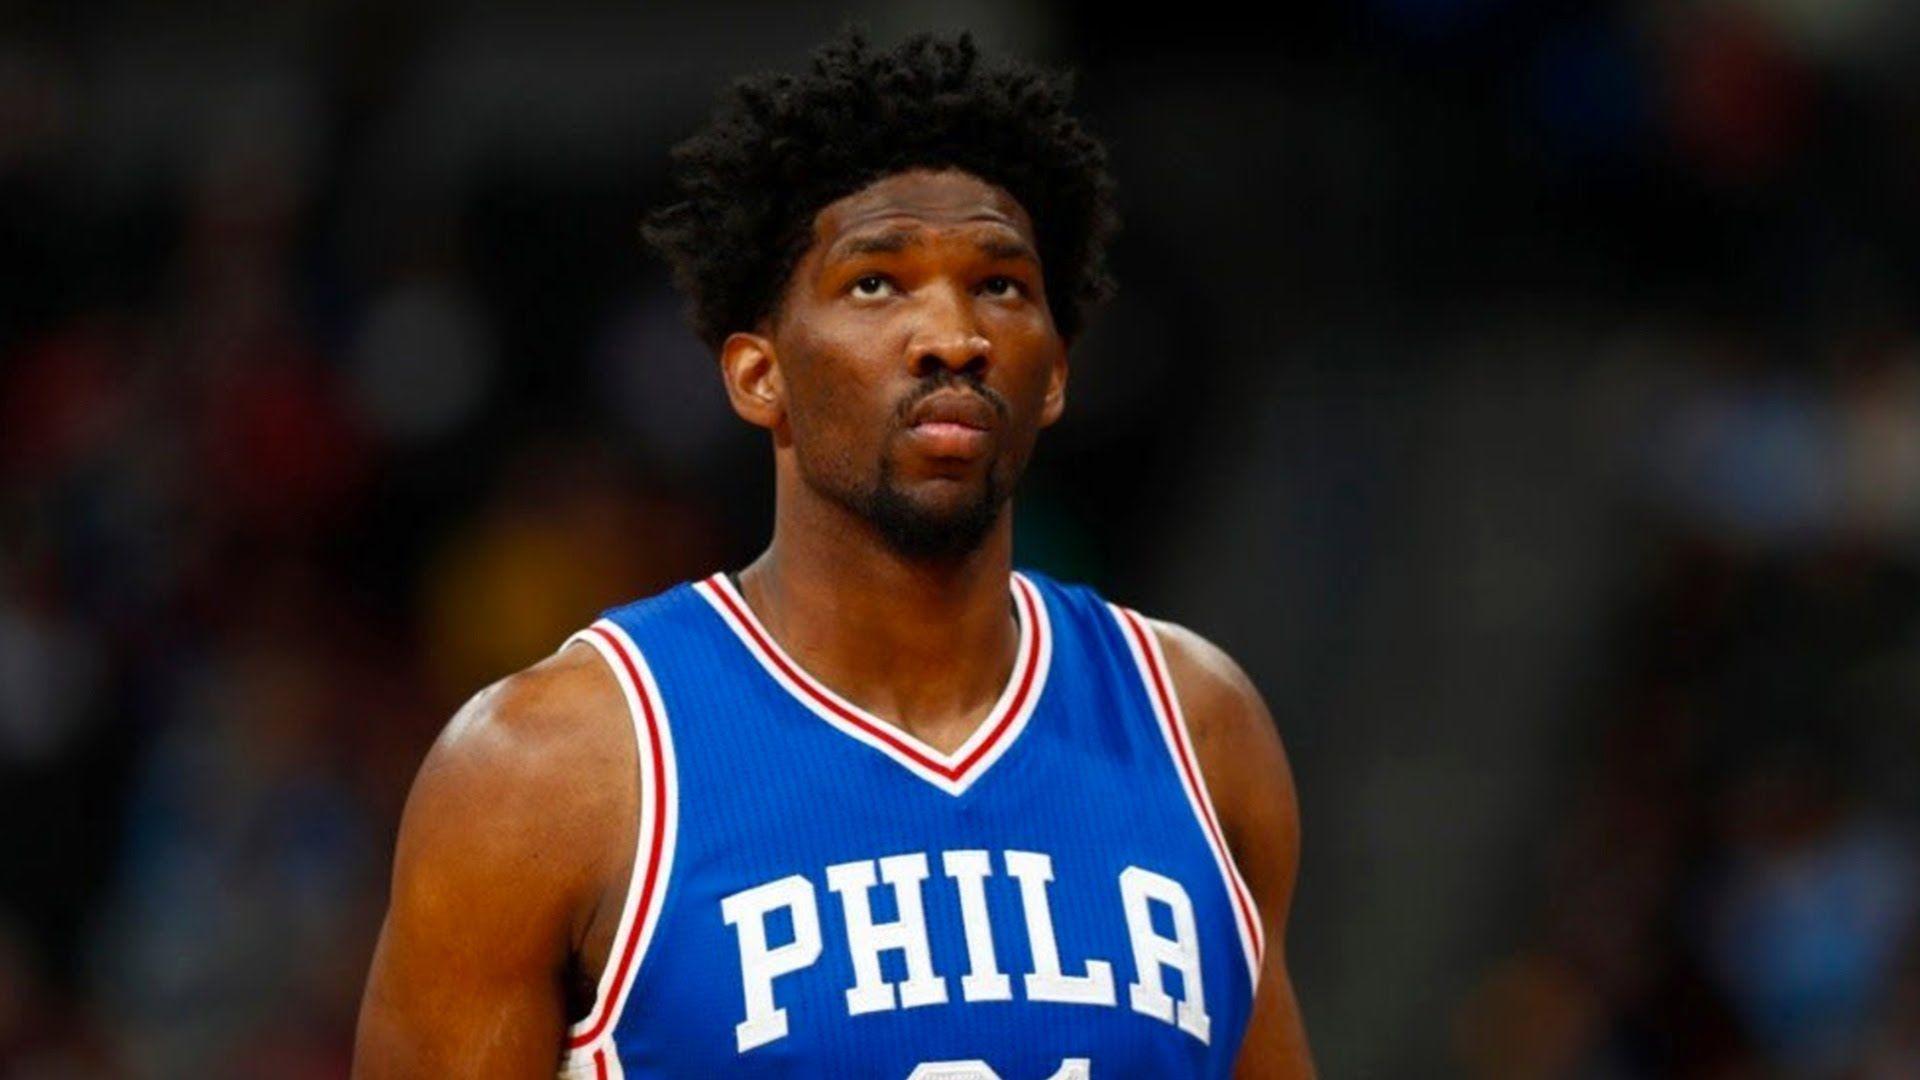 Today Sports Is the Master Troll. See how Joel Embiid